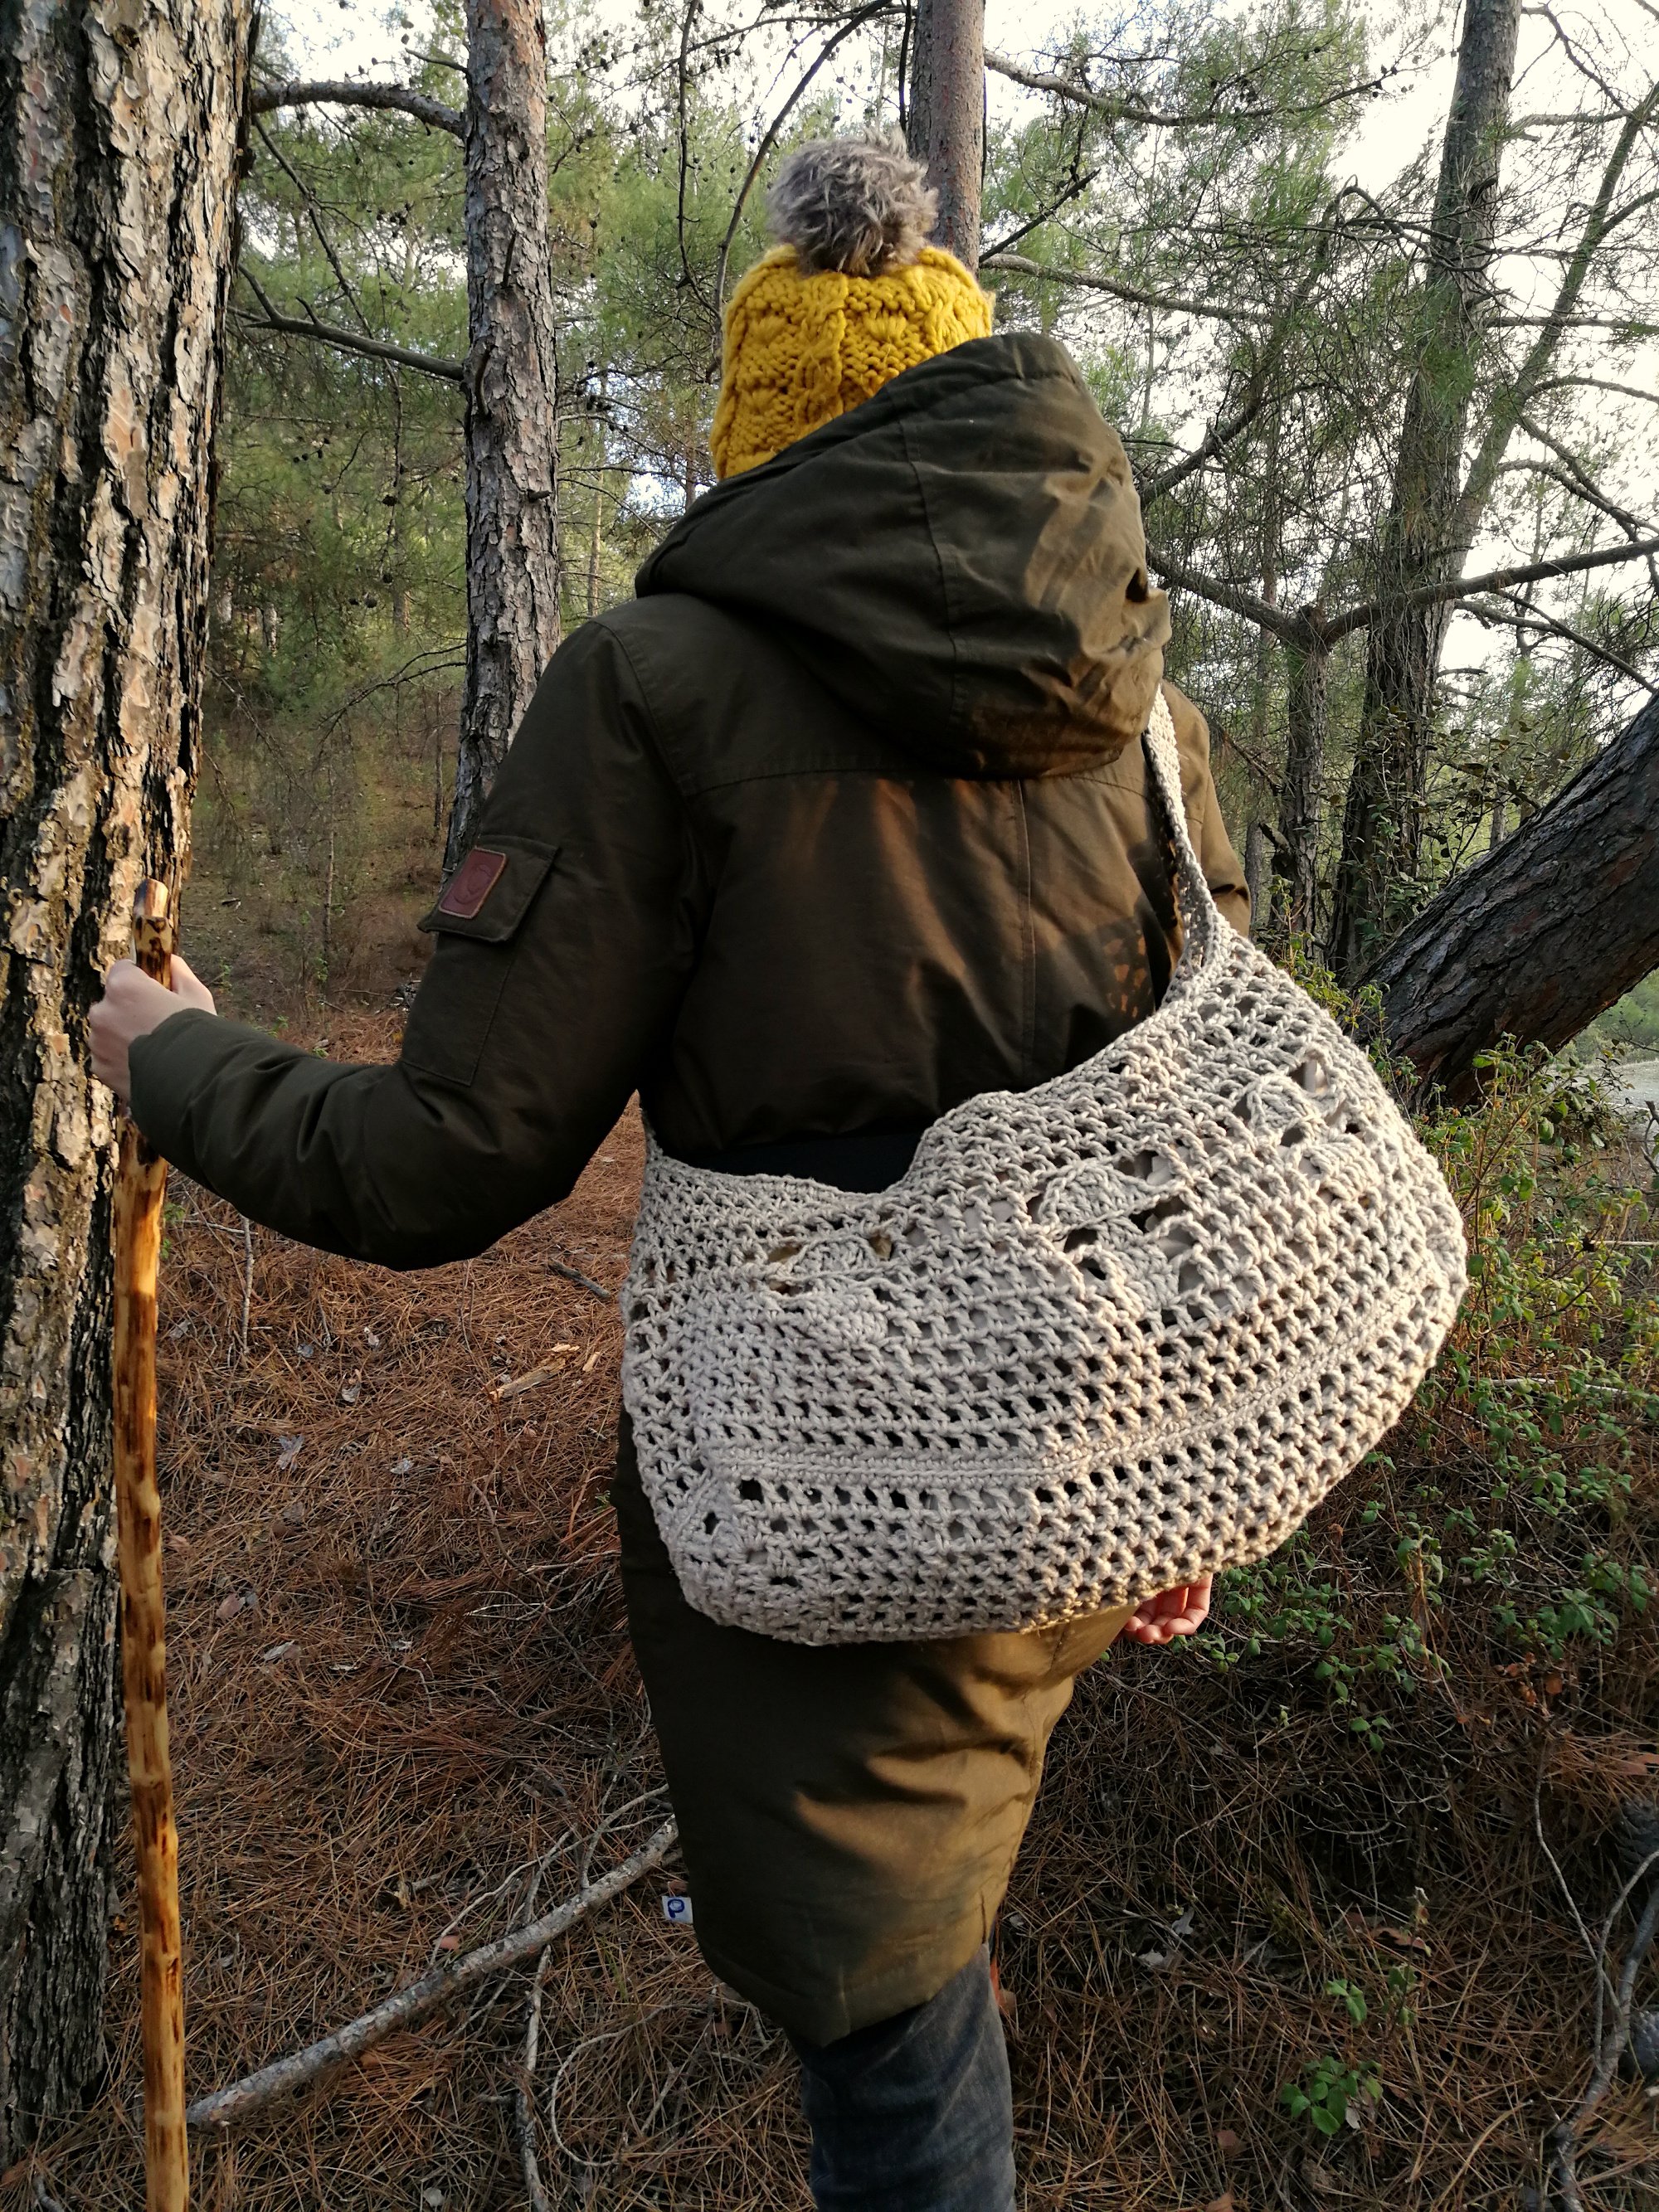 Tina is stood in the woods with the mushroom bag across her body with the bulk at her back. 3 crocheted mushrooms create a line across the middle of the bag.